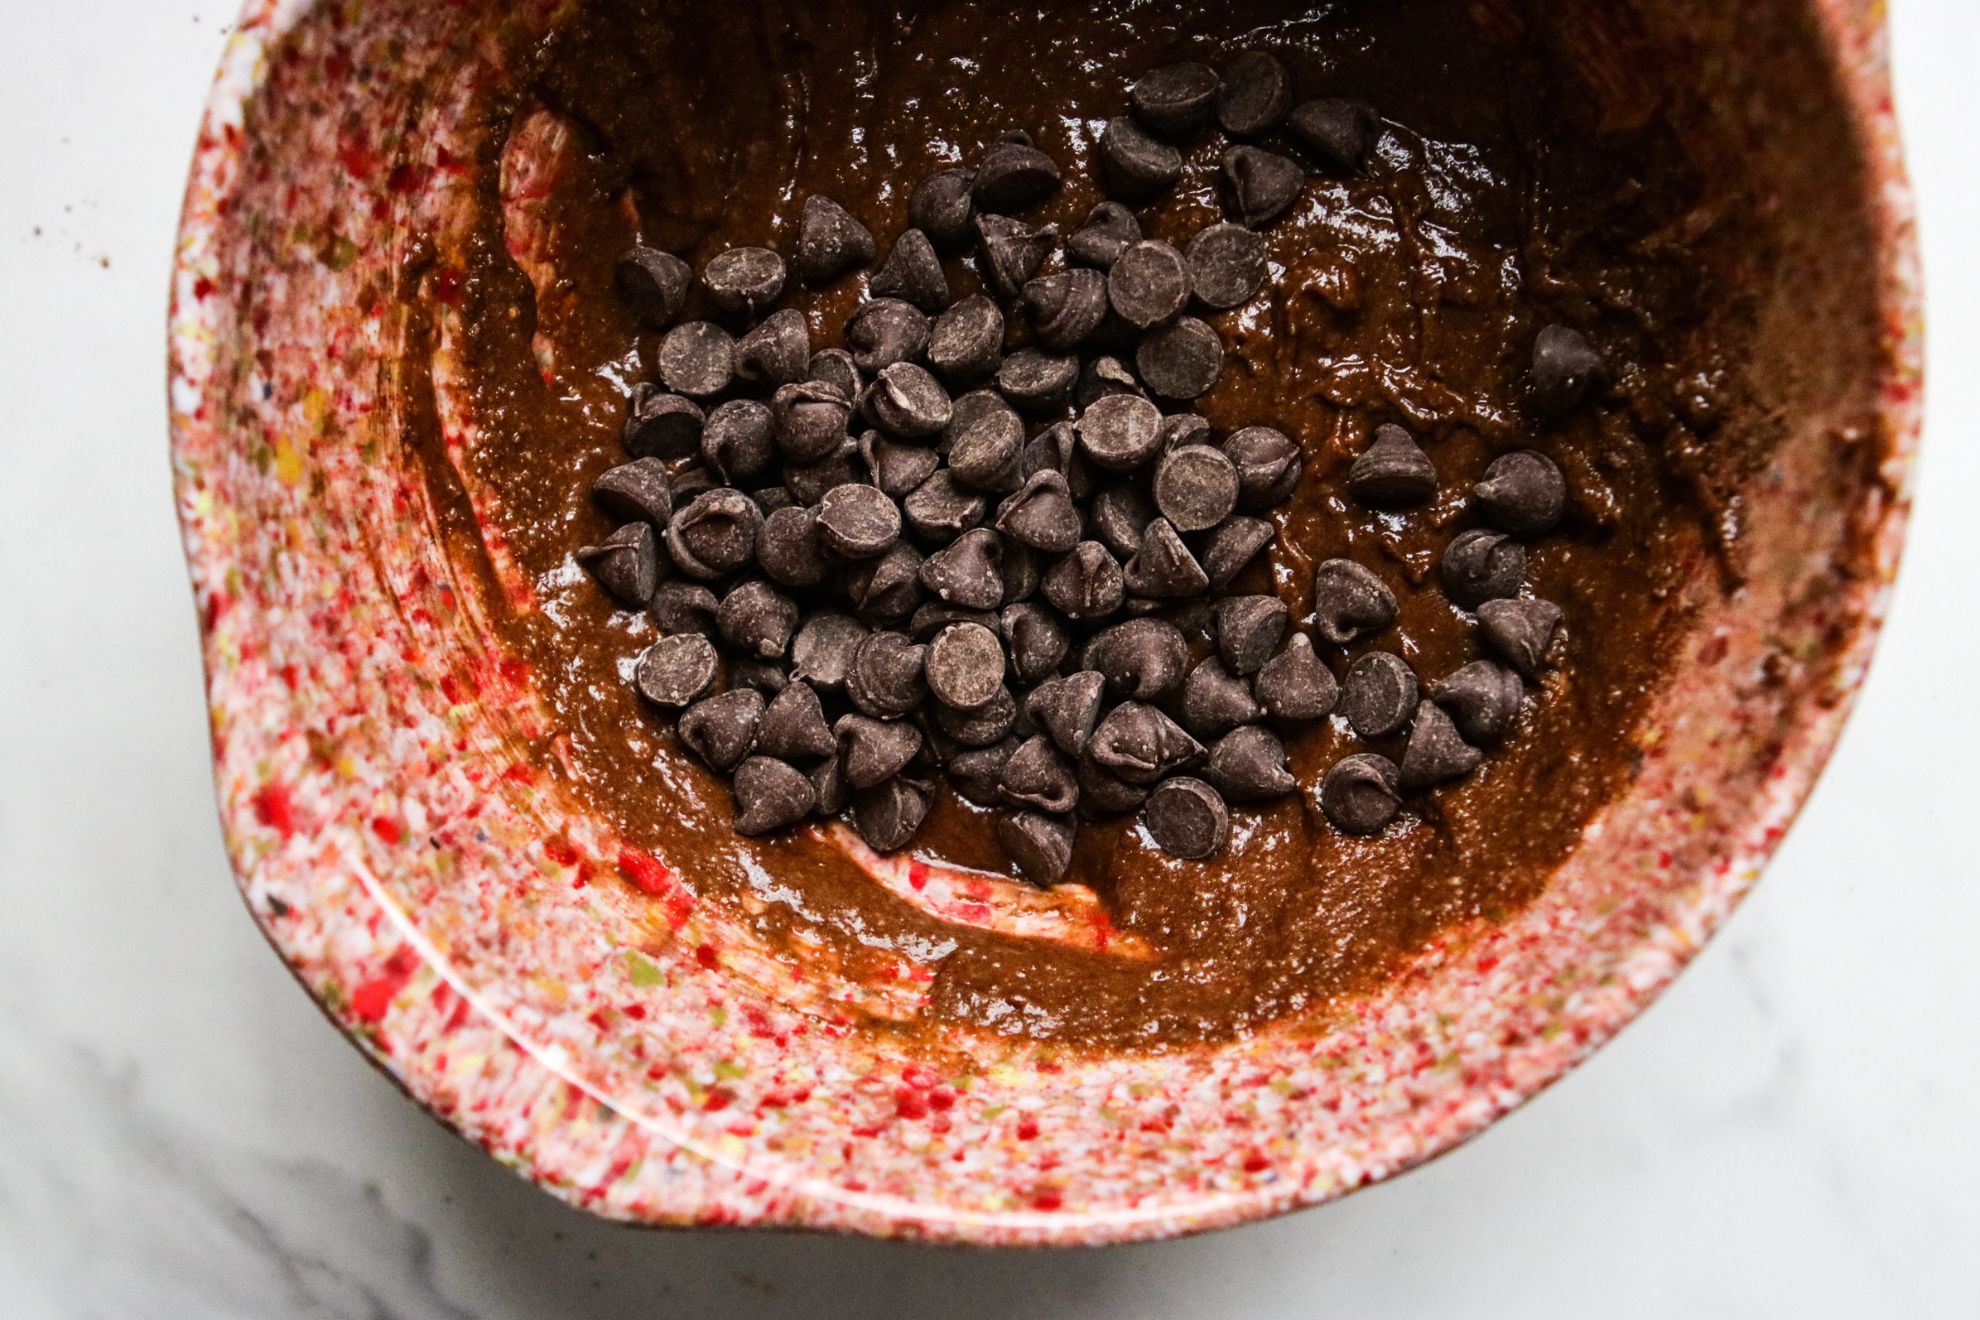 This is an overhead horizontal image of a pink speckled bowl on a white marble counter. In the bowl is a chocolate batter with chocolate chips on top.